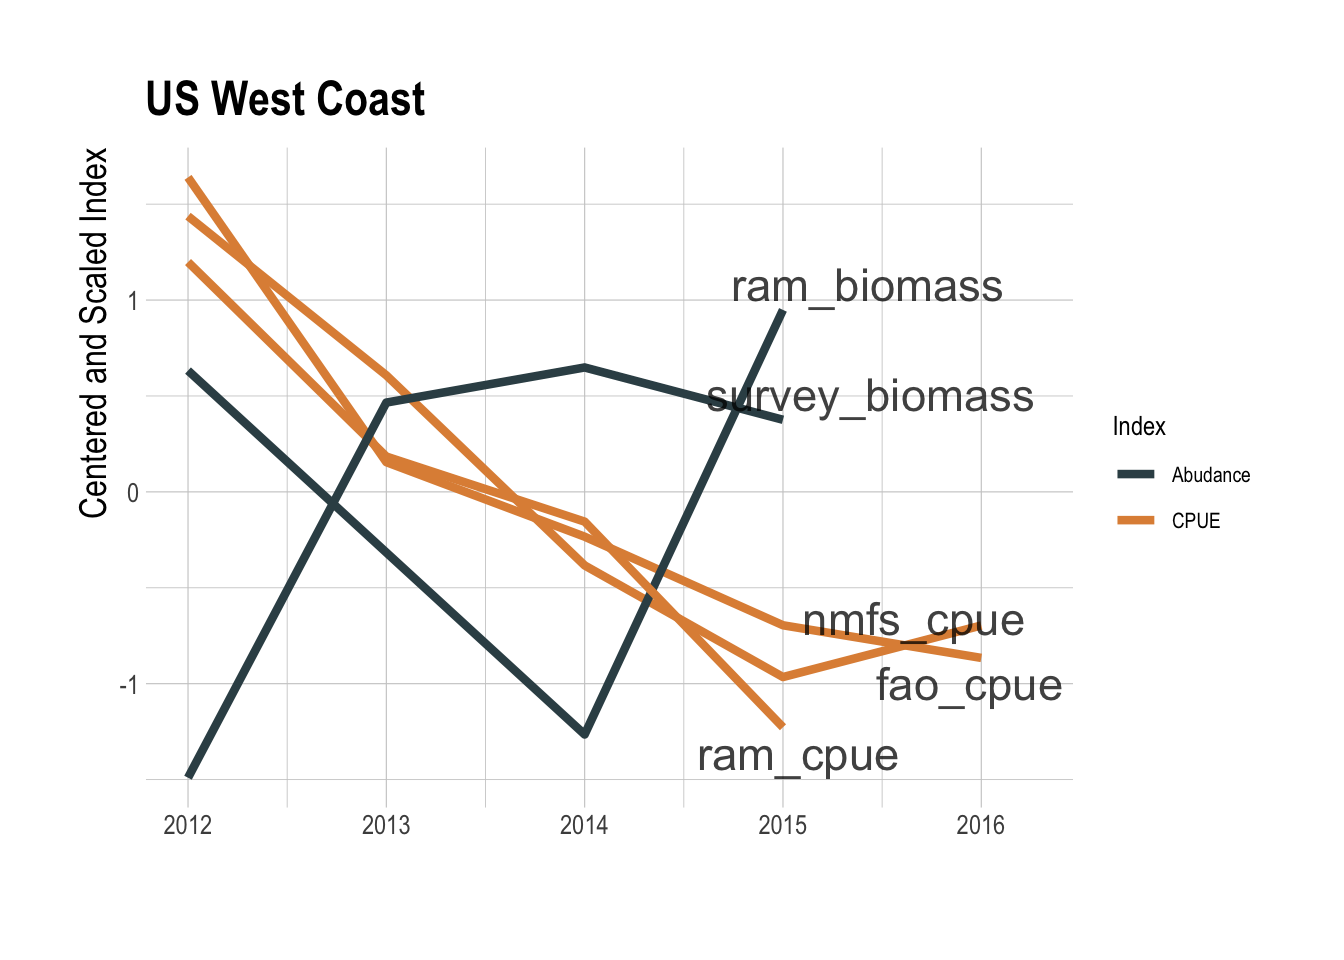 GFW derived CPUE (orange) and assessments of abundance (black) for the US West Coast